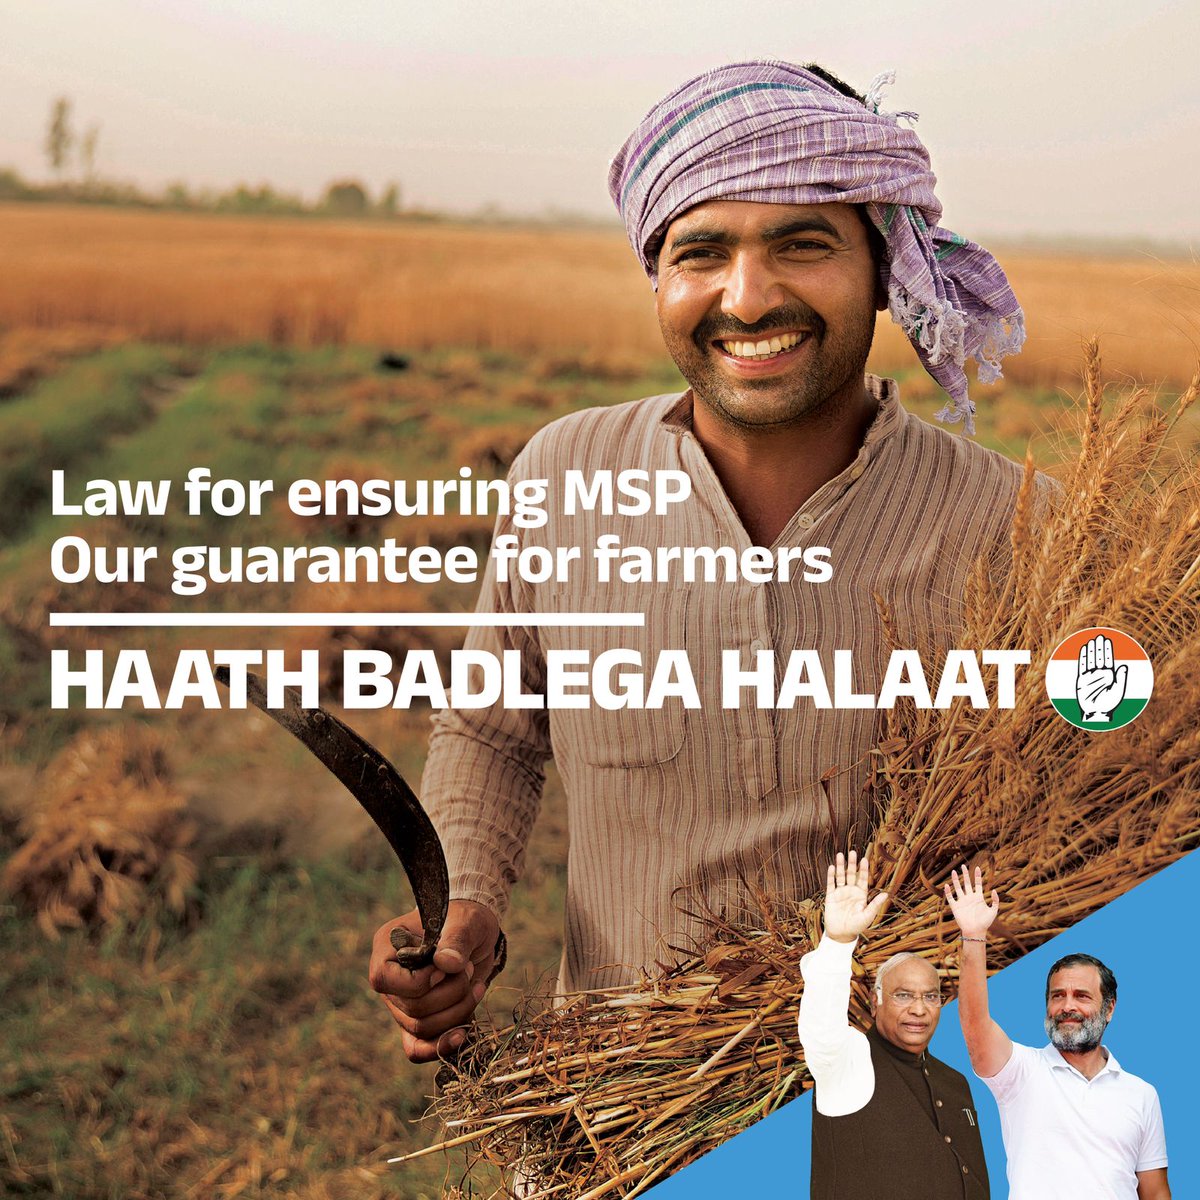 Our farmers have struggled enough for their rights! We will ensure to bring in a law that provides guaranteed MSP to our Annadatas! Call 9911041424 to register for Congress's Nyay Guarantee!